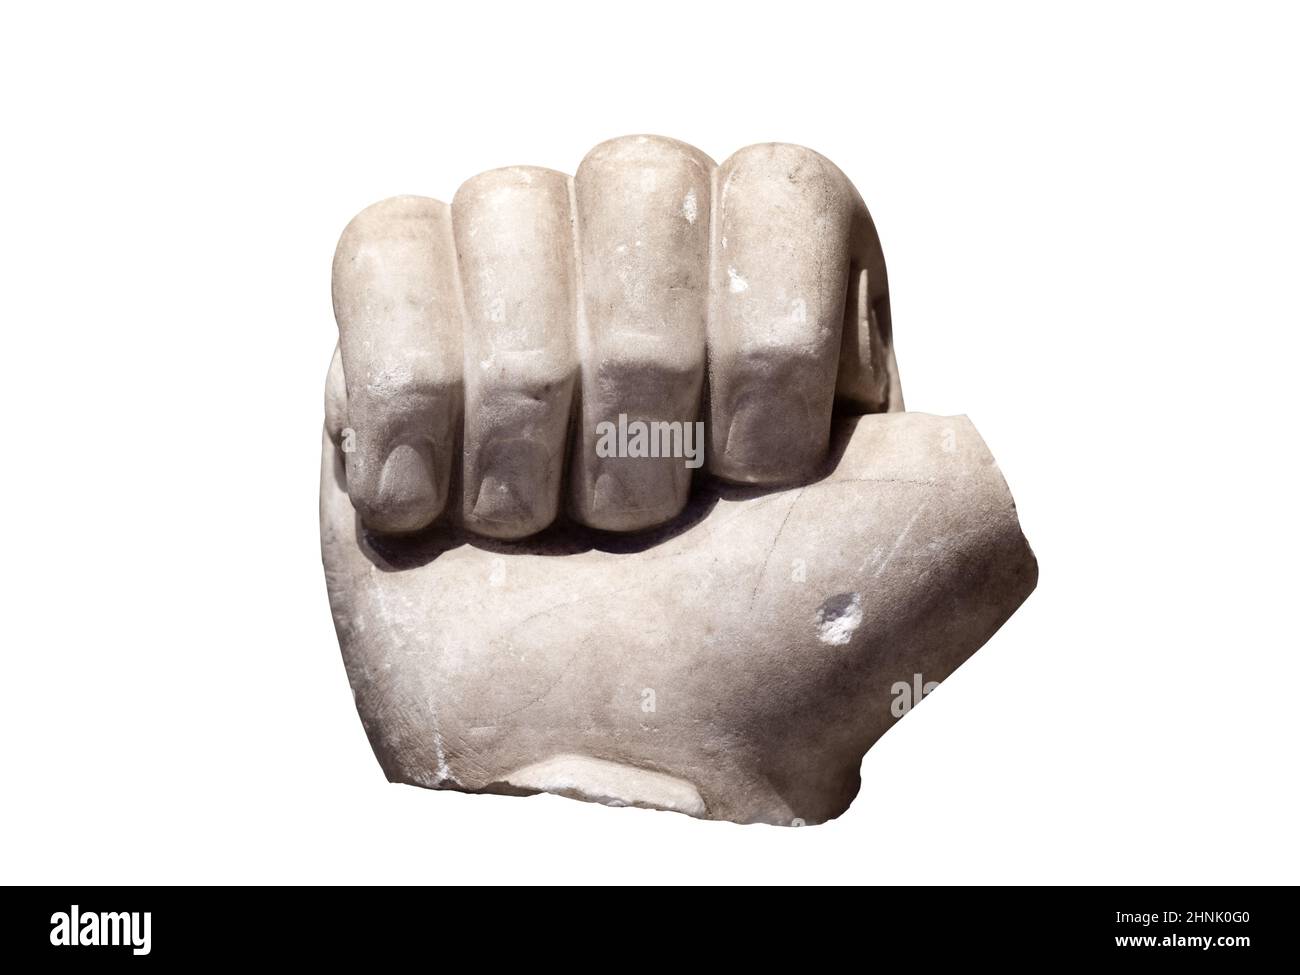 white marble statue male fist with broken thumb finger Stock Photo